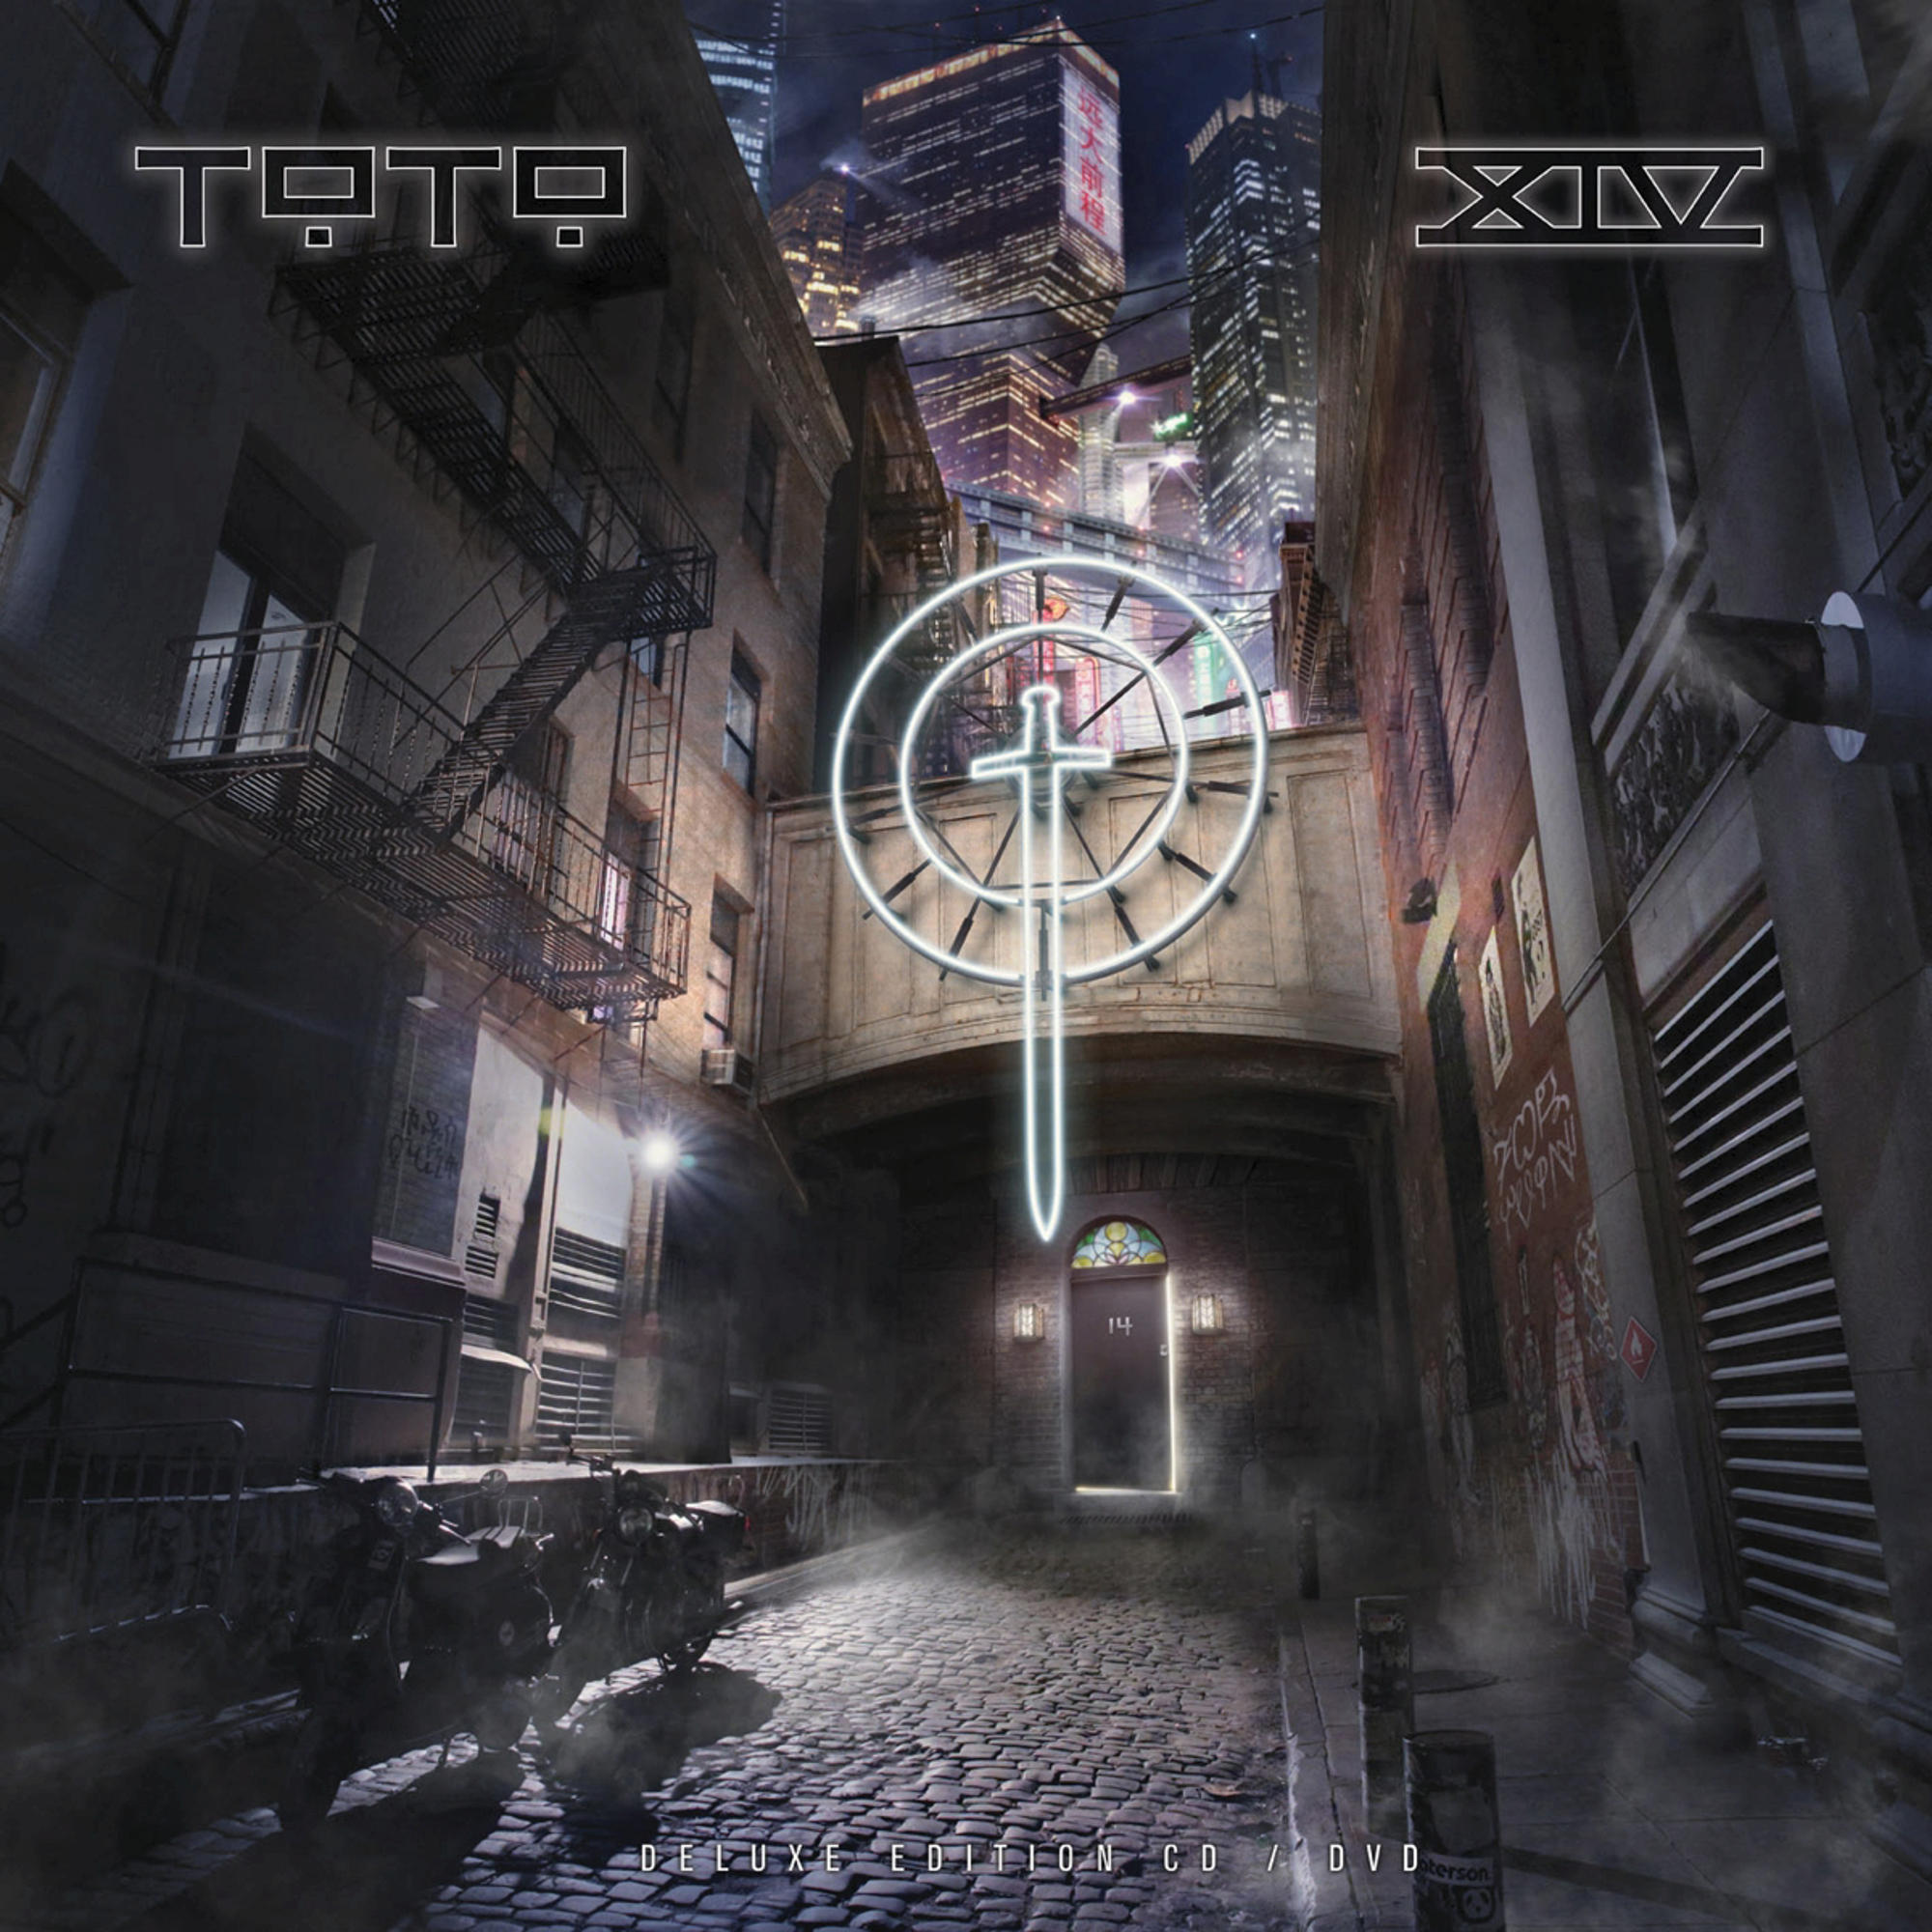 - Toto Toto + - Video) (CD (Limited Edition) XIV Ecolbook DVD